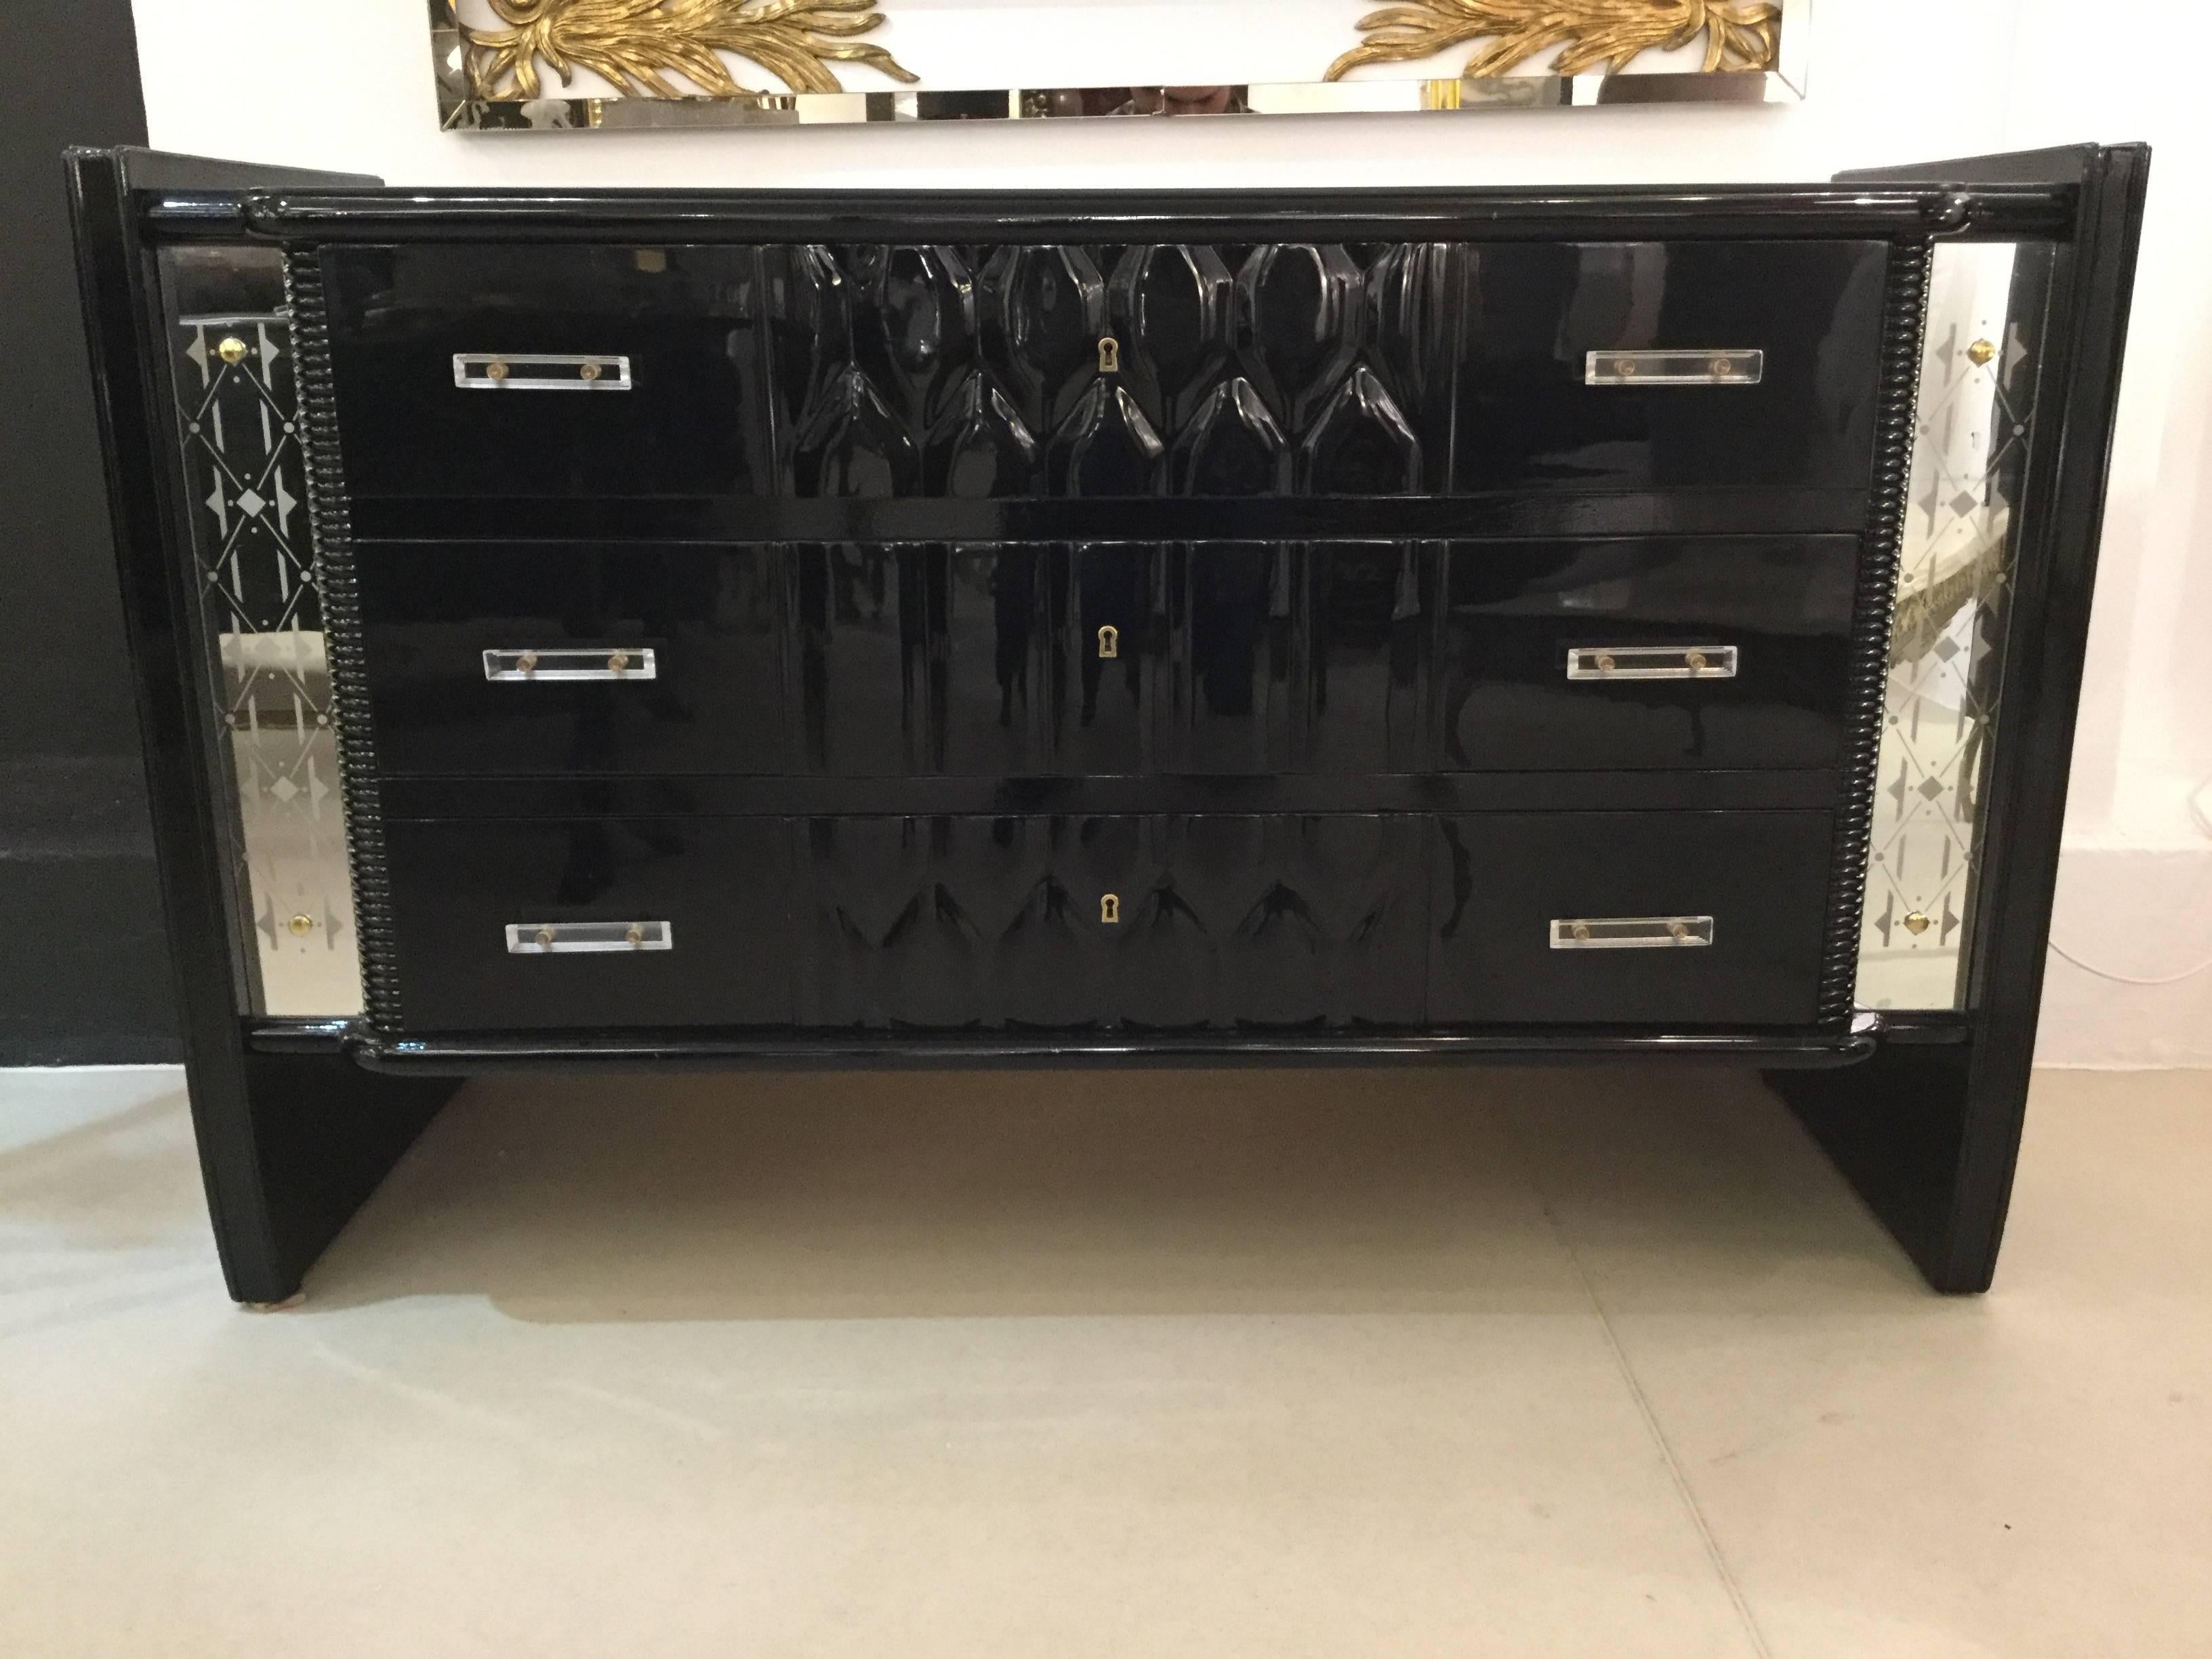 An elegant Art Deco chest of drawers in black lacquered wood with Lucite handles and two engrave mirrors on the front sides.
In excellent condition.